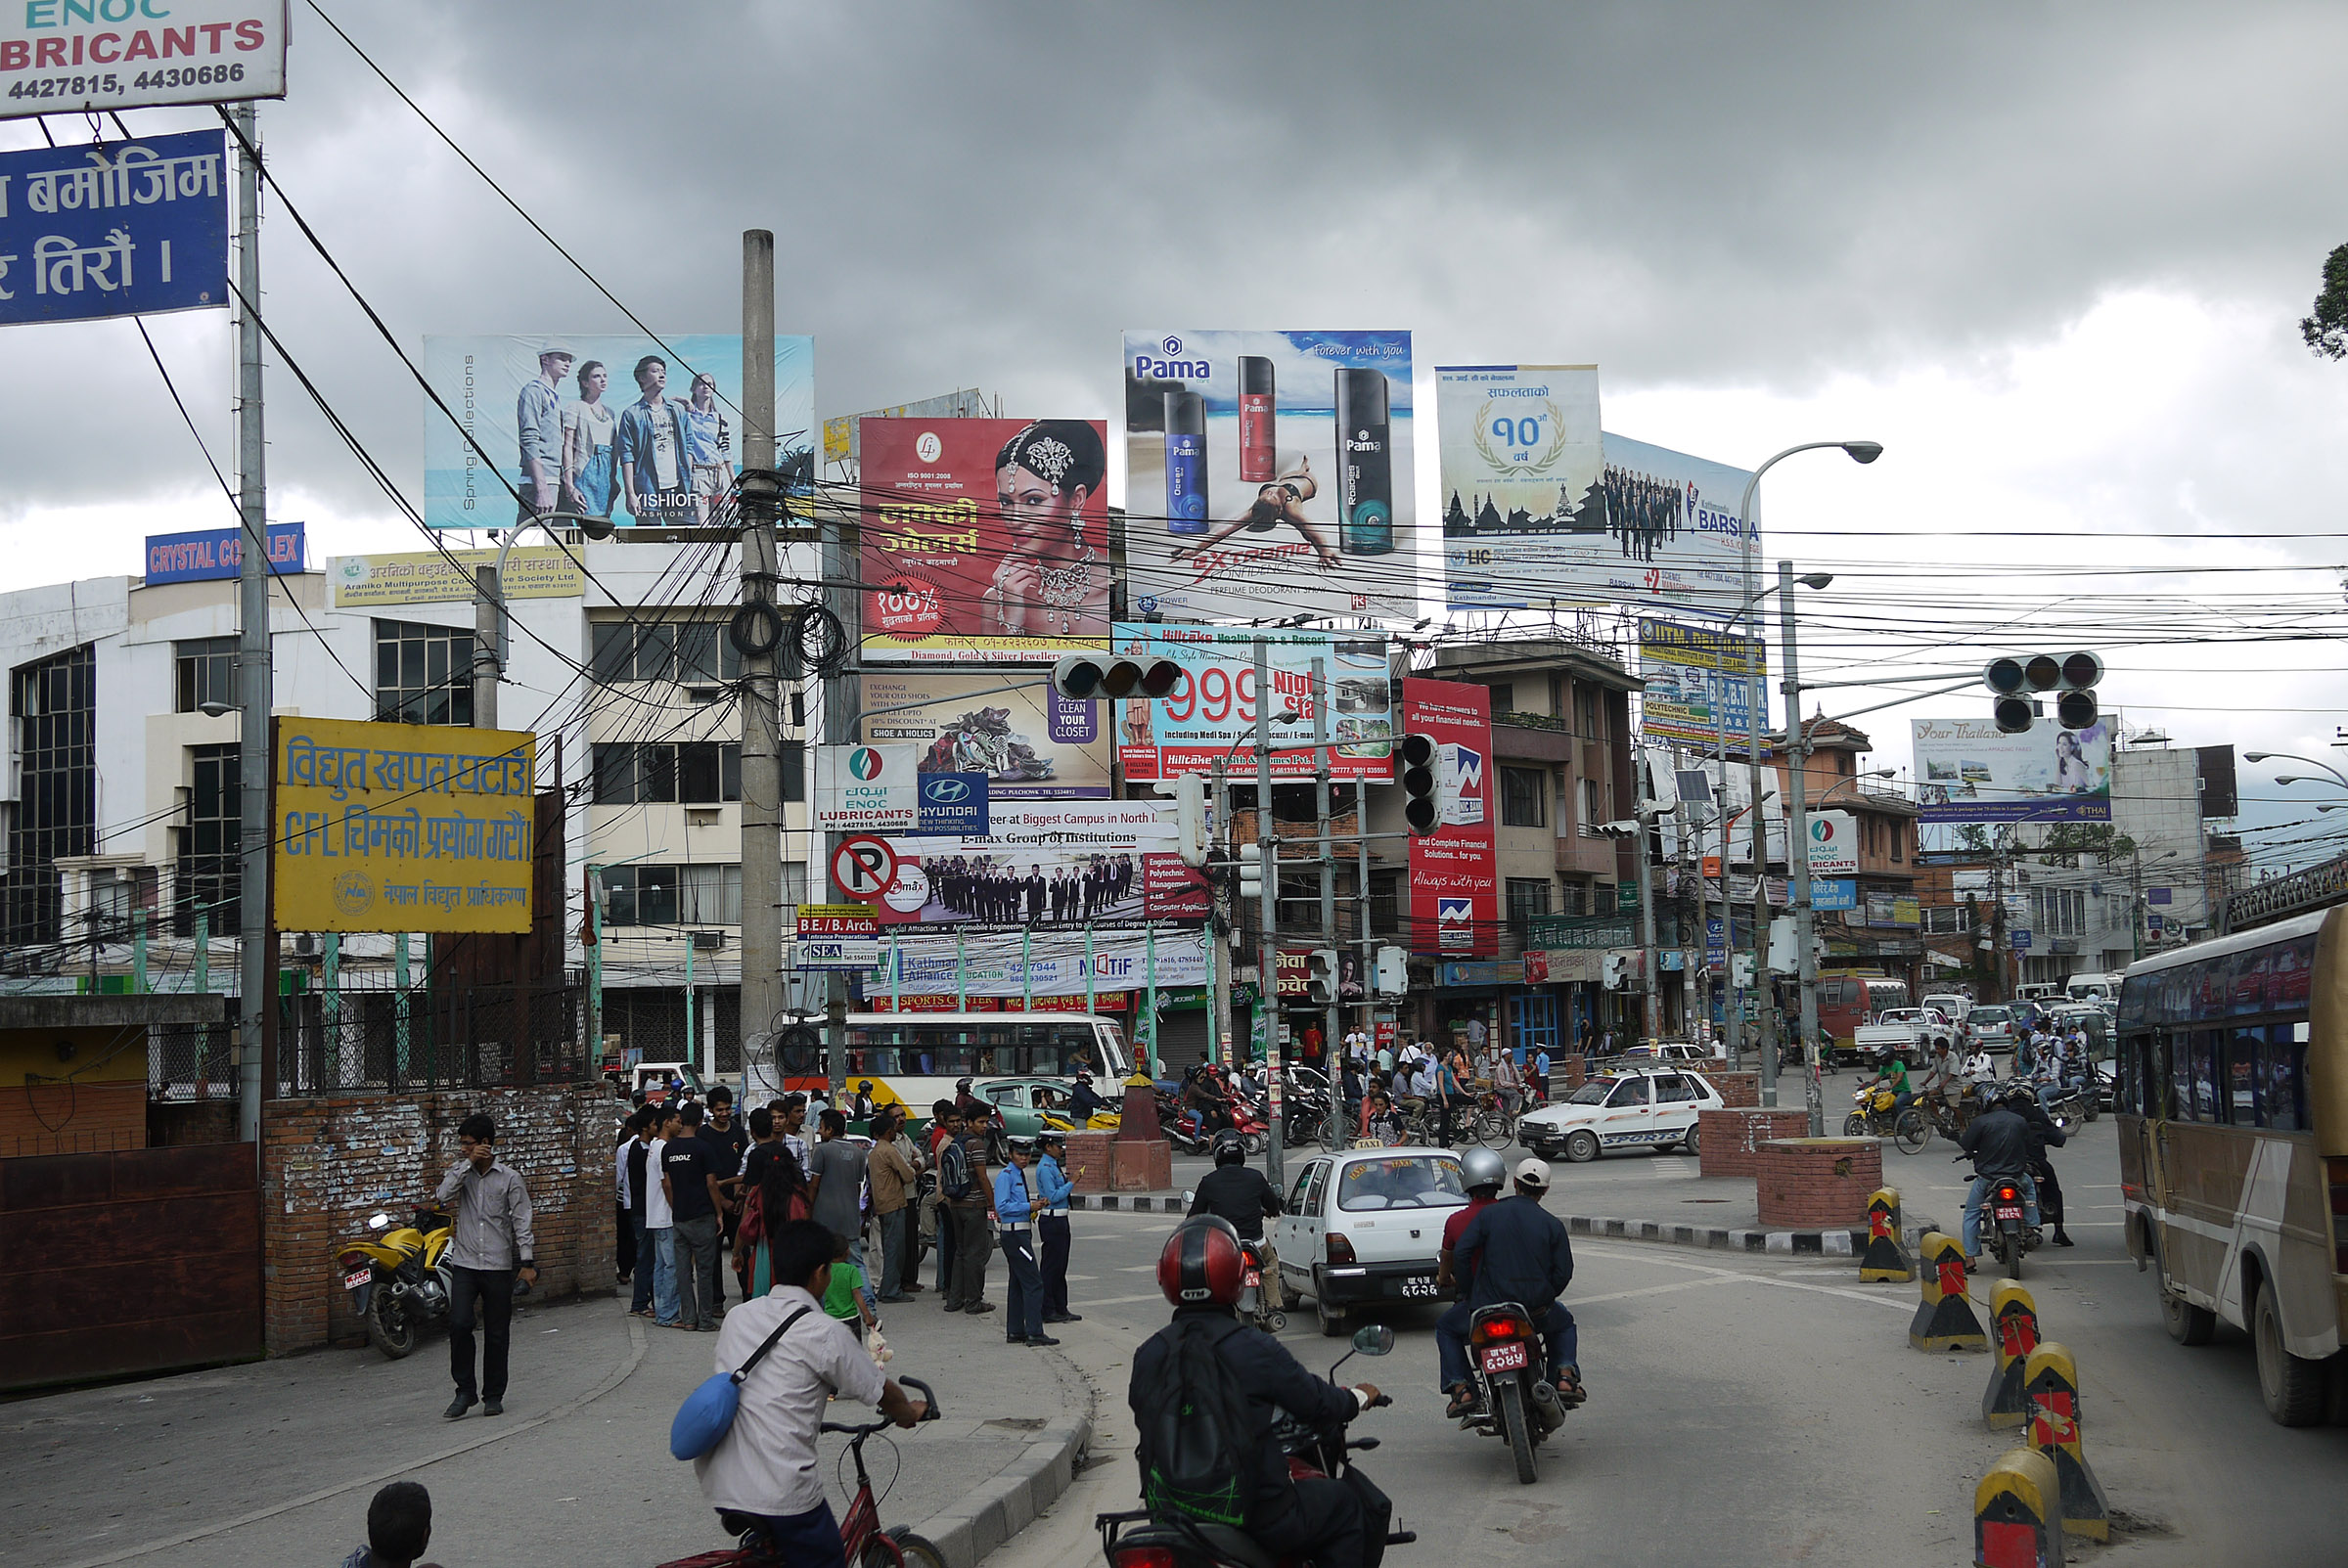 A very busy street in Kathmandu; there are people on the sidewalk and driving cars and bikes, billboards in the distance.